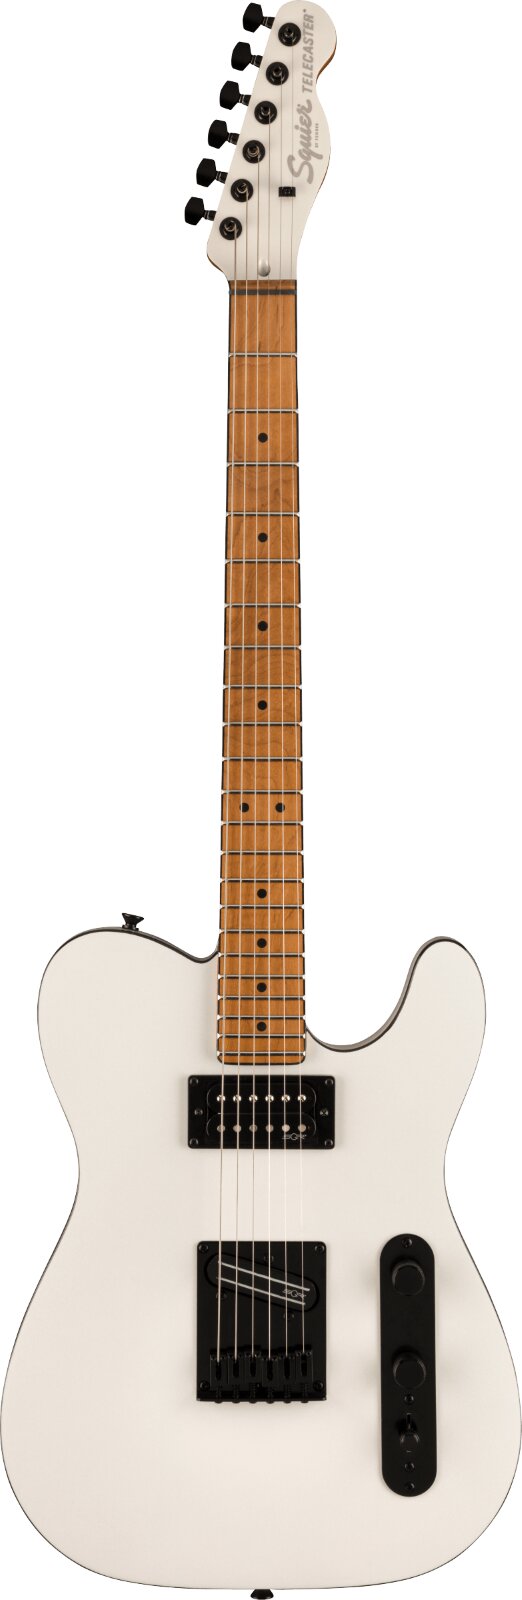 Squier Contemporary Telecaster RH Roasted Maple Griffbrett Pearl White : photo 1